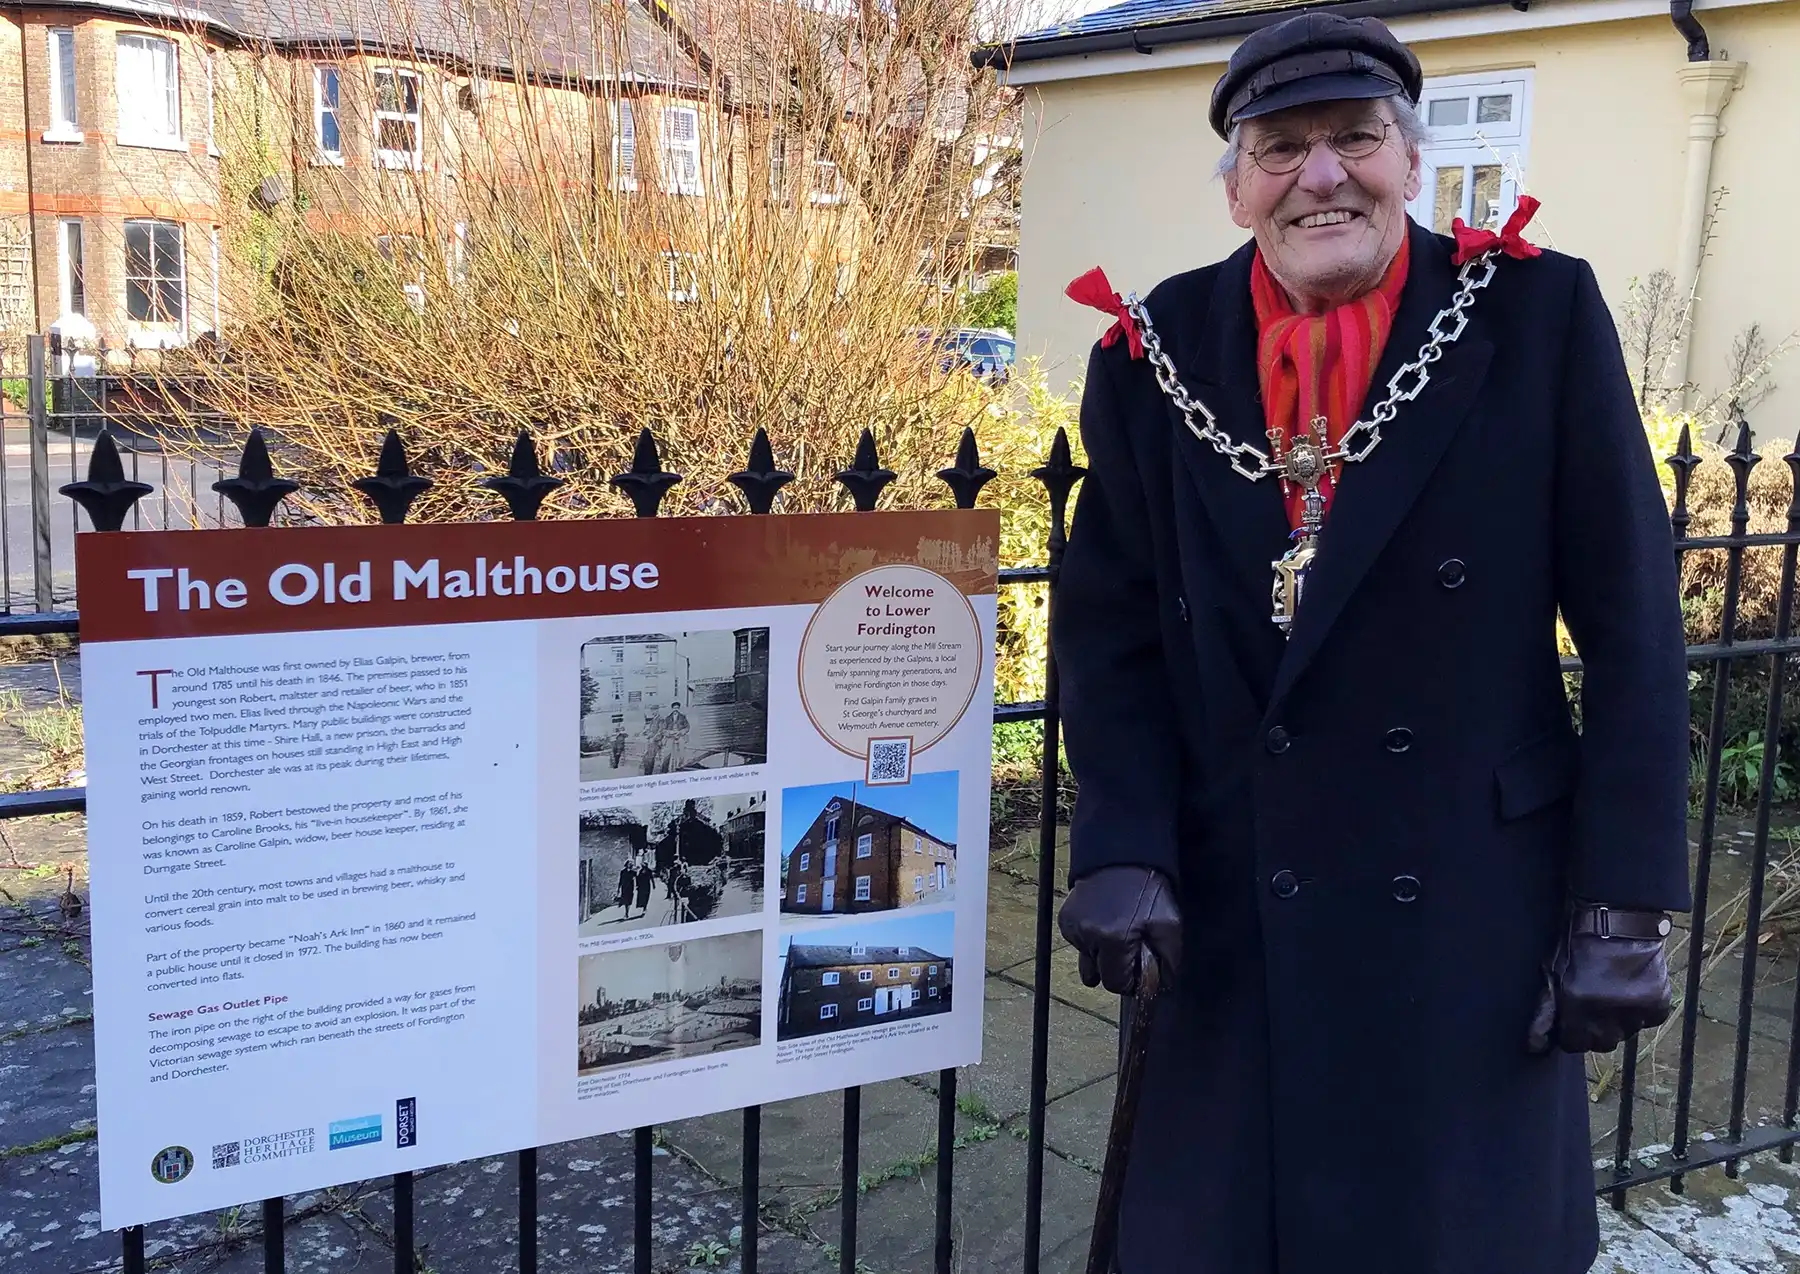 Mayor of Dorchester, Cllr Alistair Chisholm, with one of the new information boards